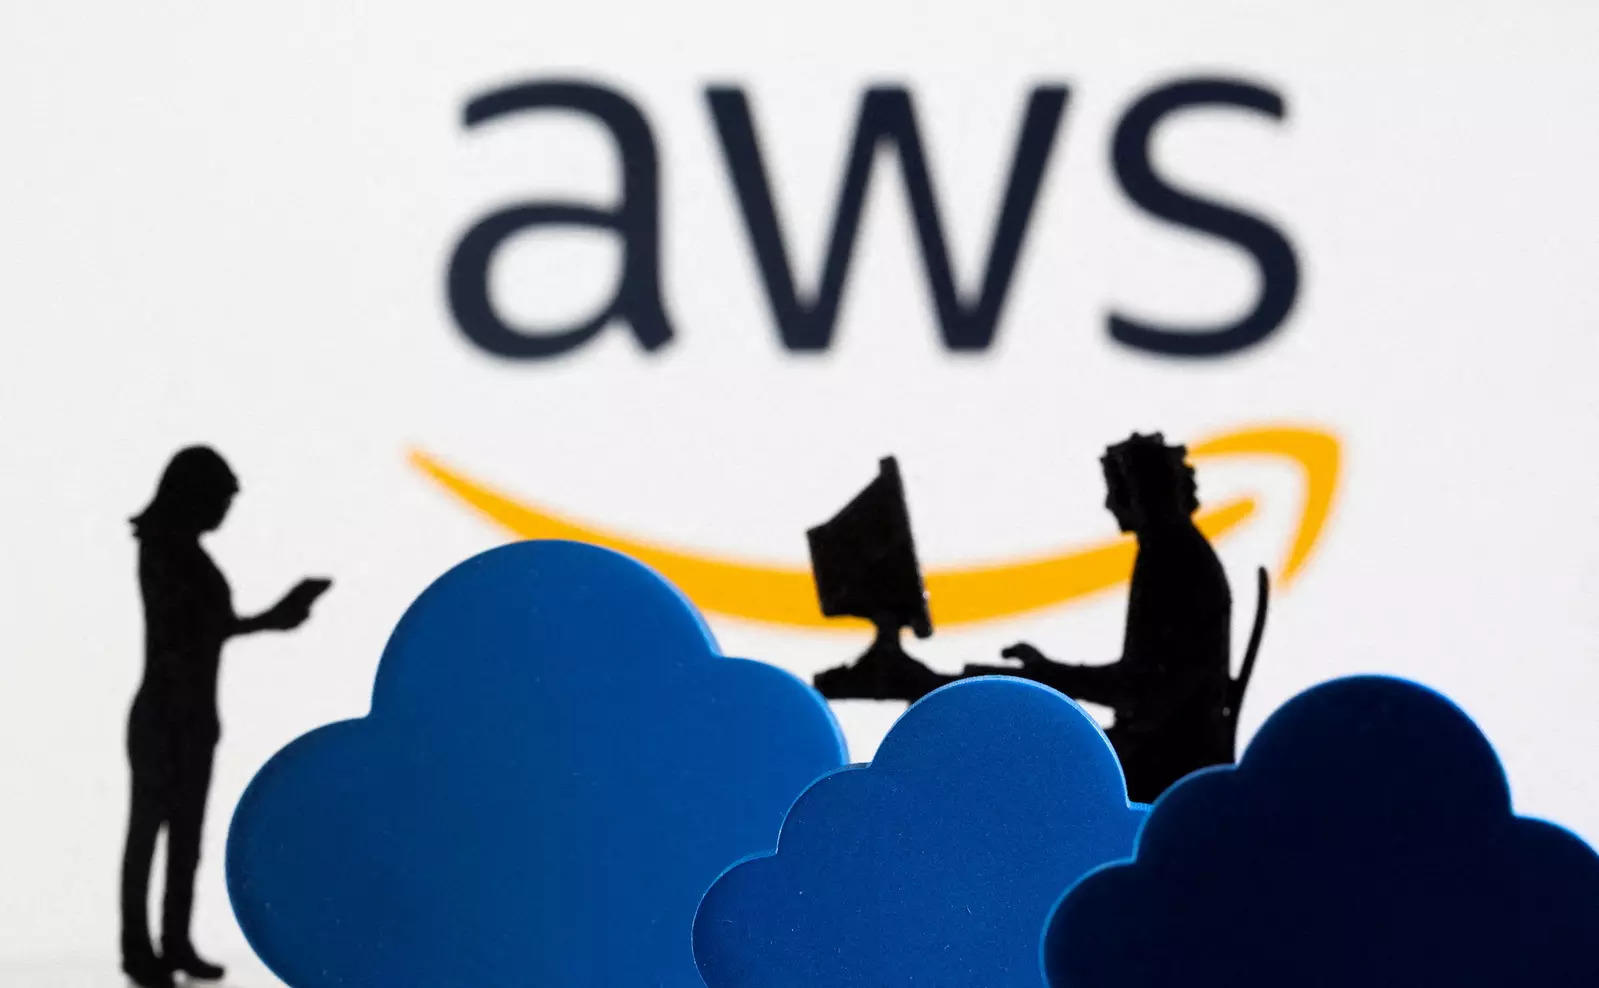  FILE PHOTO: 3D printed clouds and figurines are seen in front of the AWS (Amazon Web Service) cloud service logo in this illustration taken February 8, 2022. REUTERS/Dado Ruvic/Illustration/File Photo